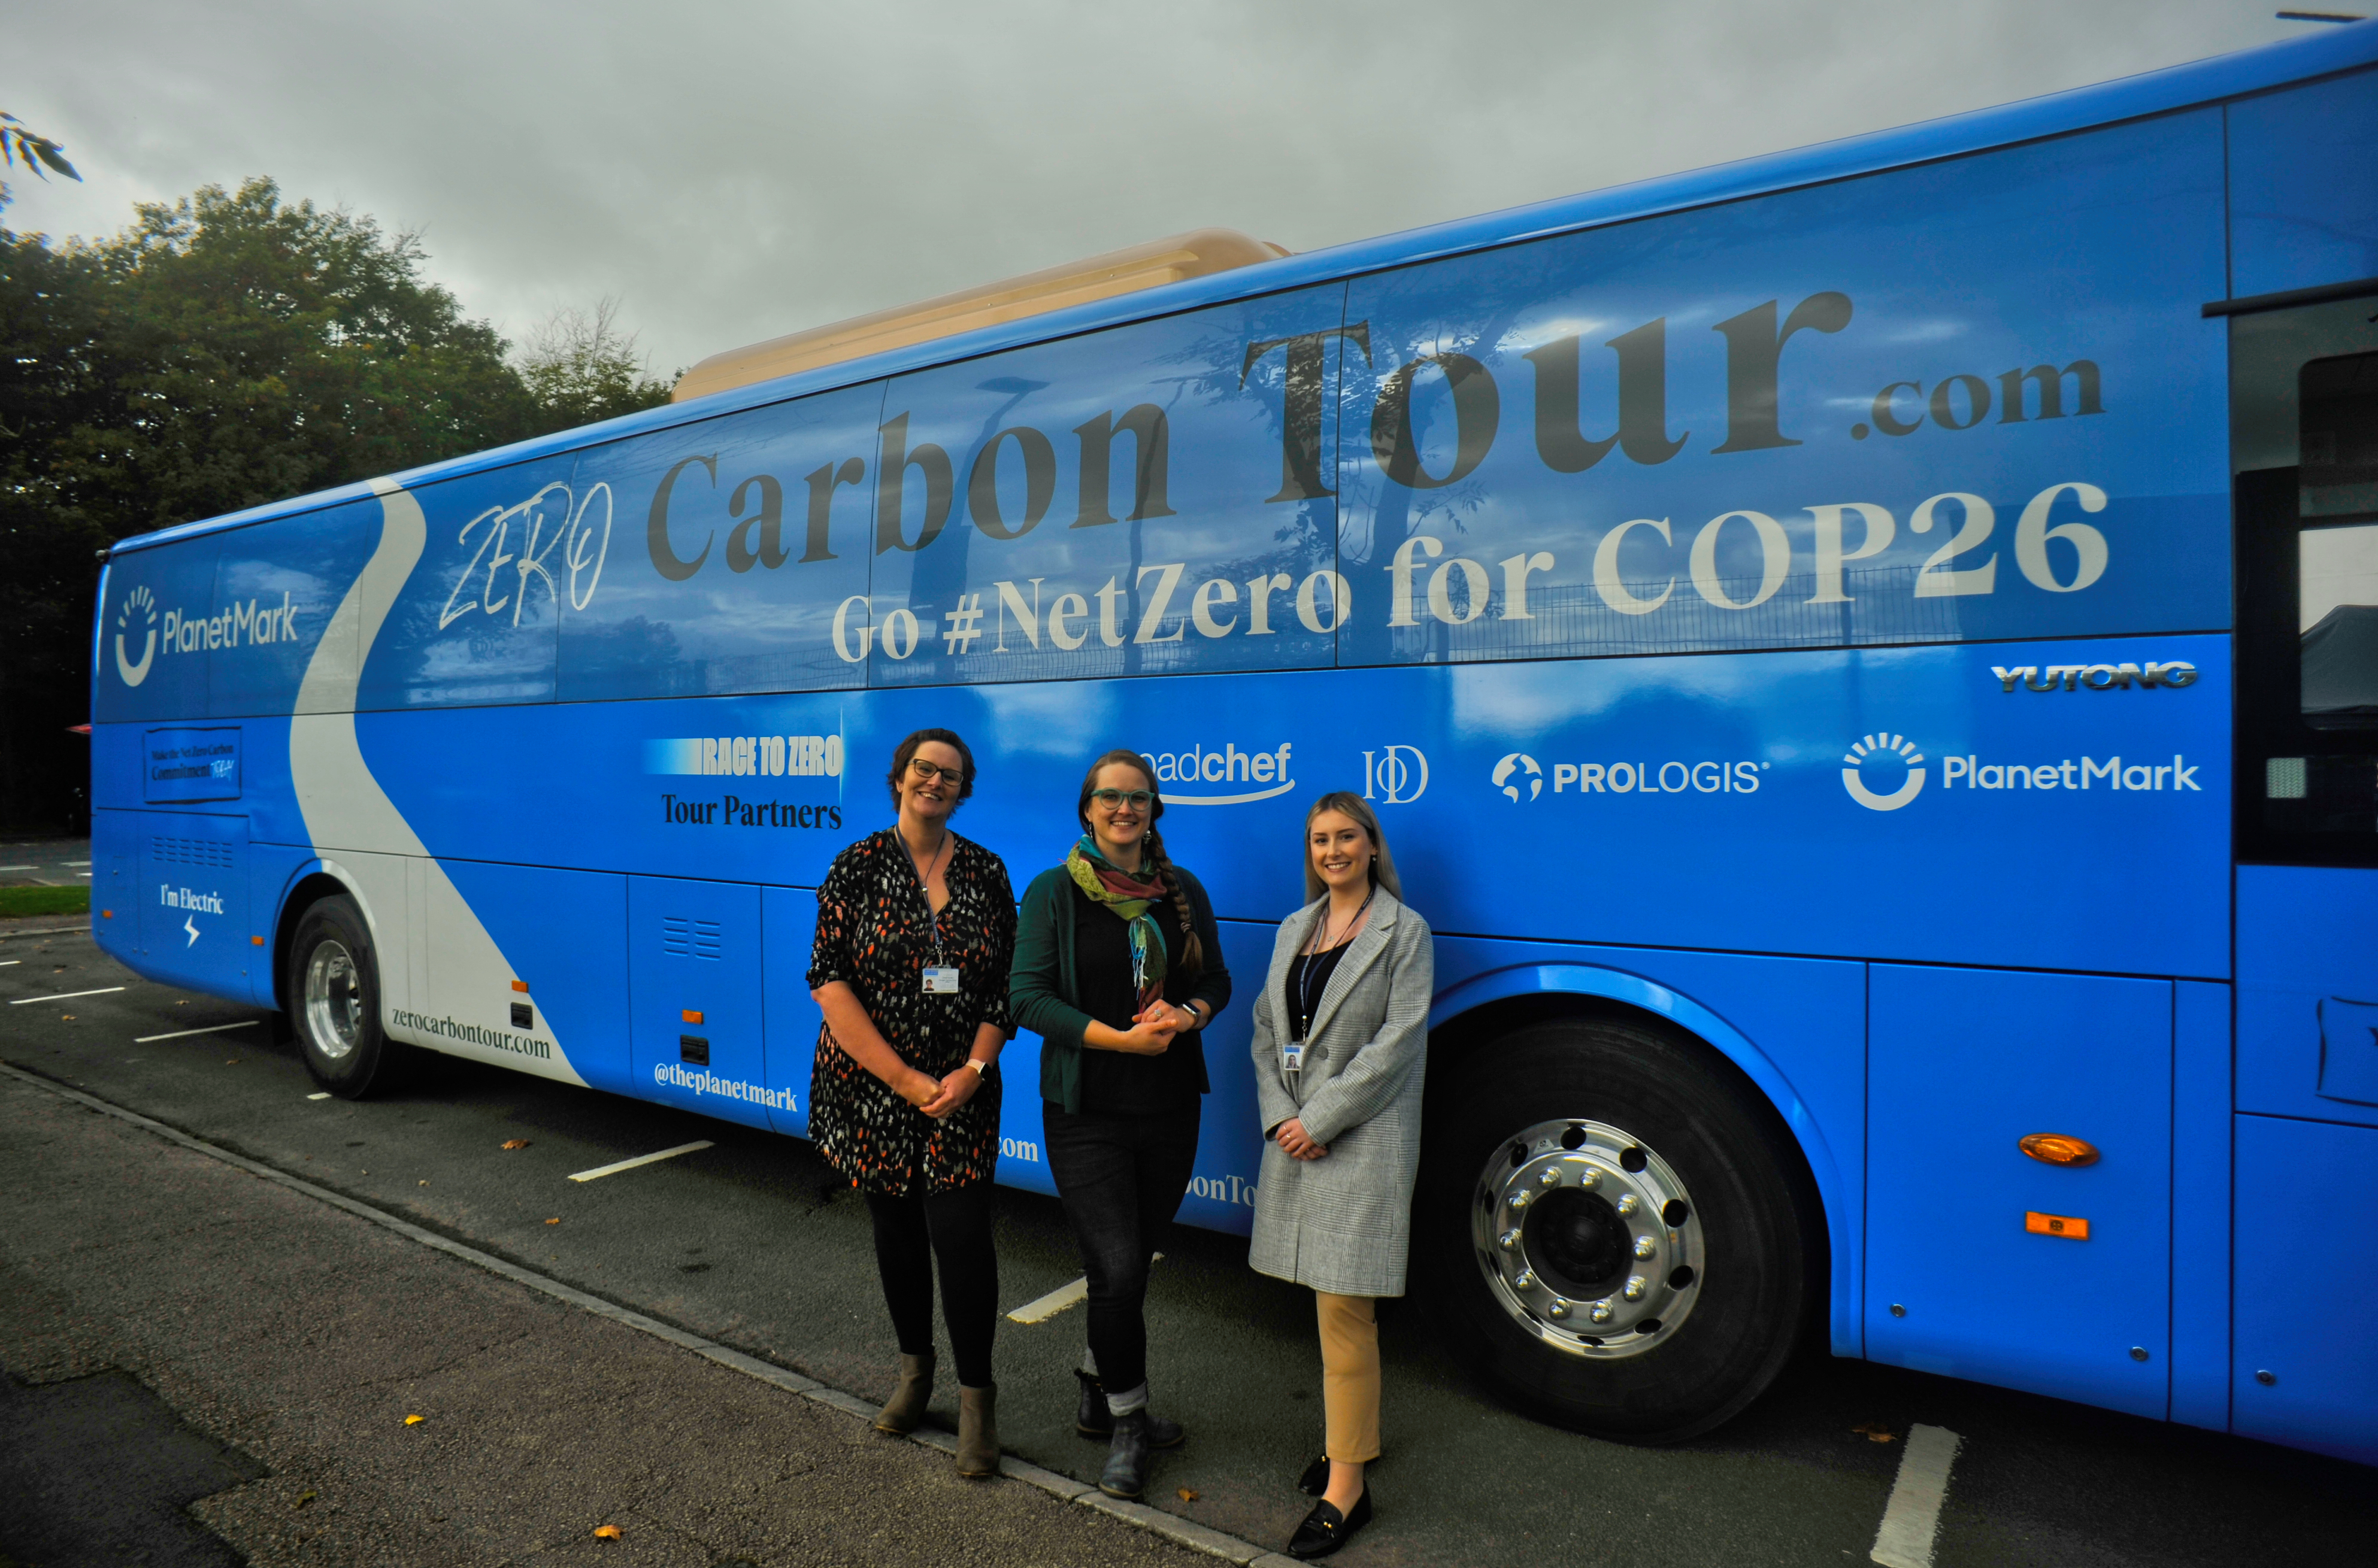 Three women stood in front of a zero carbon tour coach for COP26